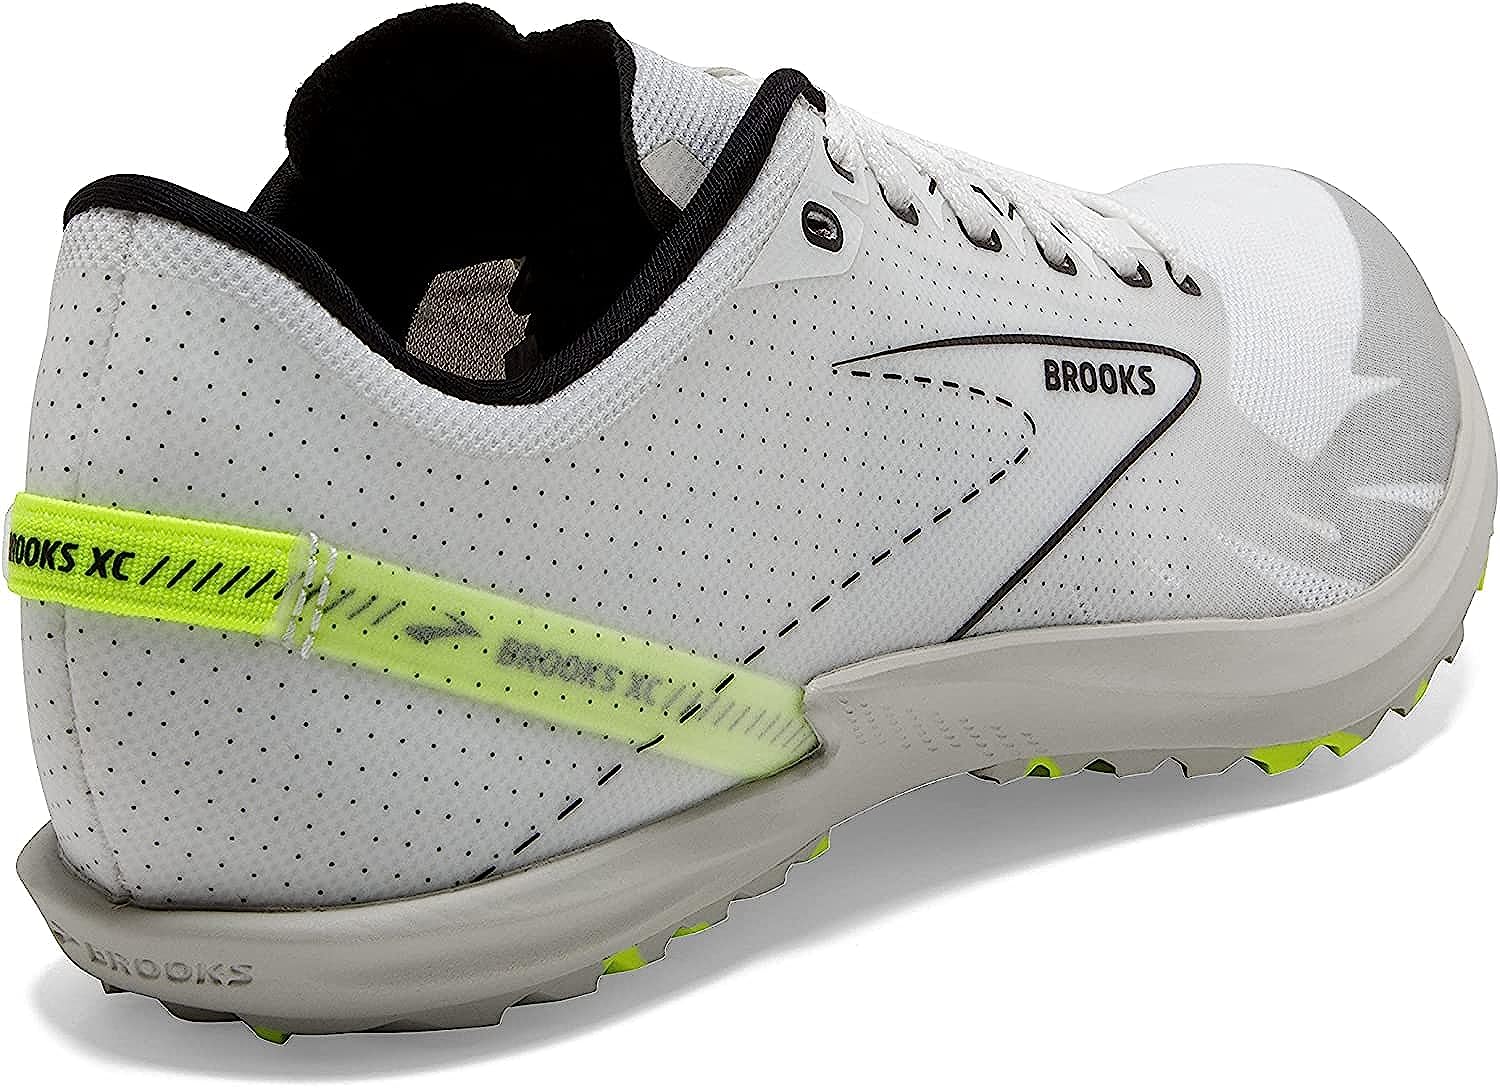 Brooks Draft XC Spikeless Supportive Cross-Country [...]